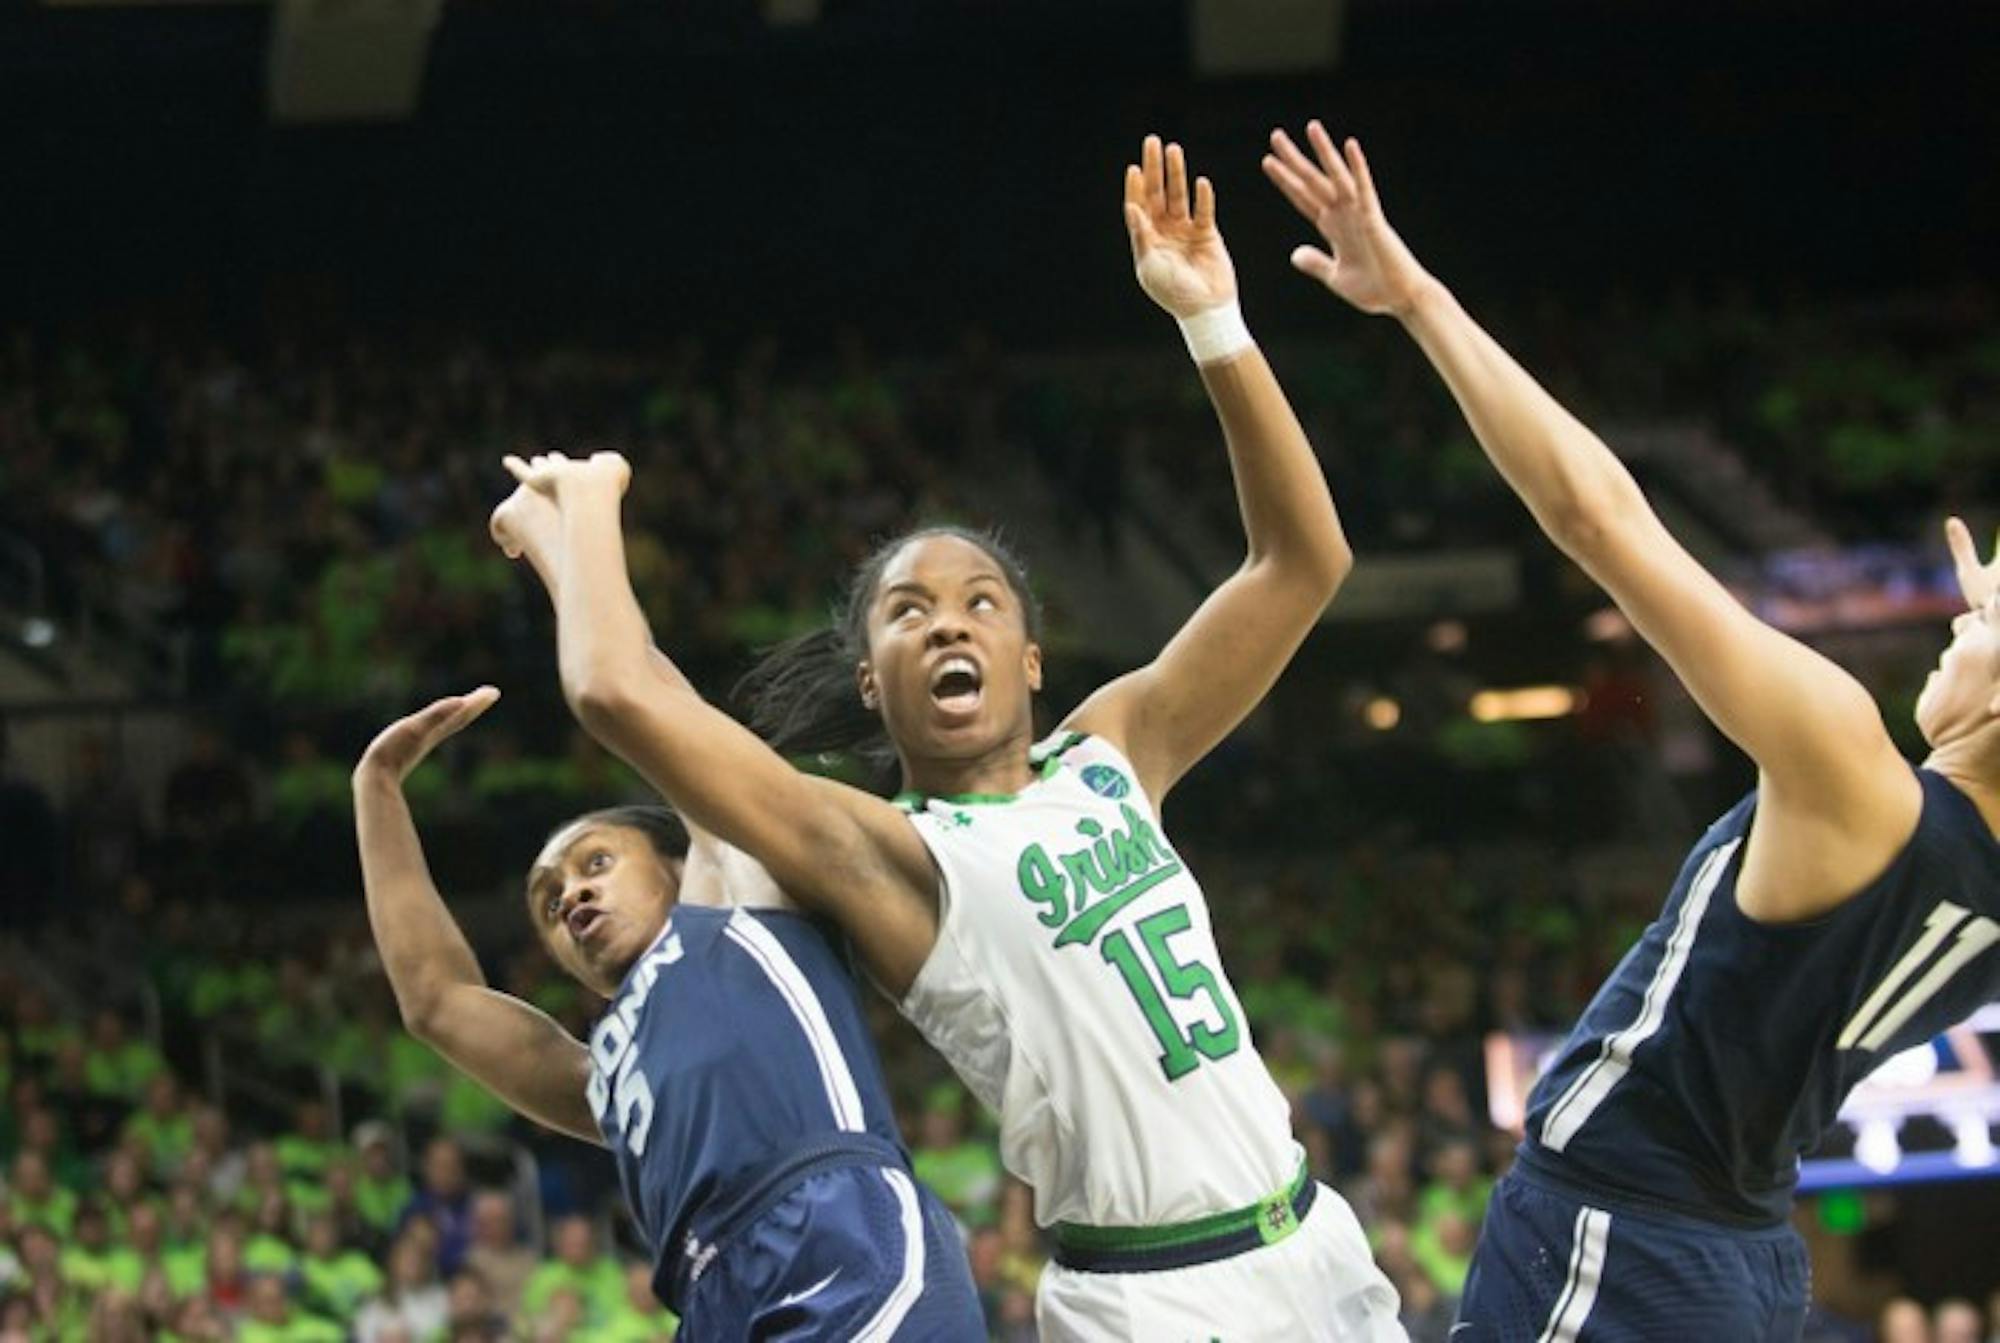 Irish senior guard Lindsay Allen fights through contact to go up for a layup during Notre Dame’s 72-61 loss to UConn on Dec. 7 at Purcell Pavilion.